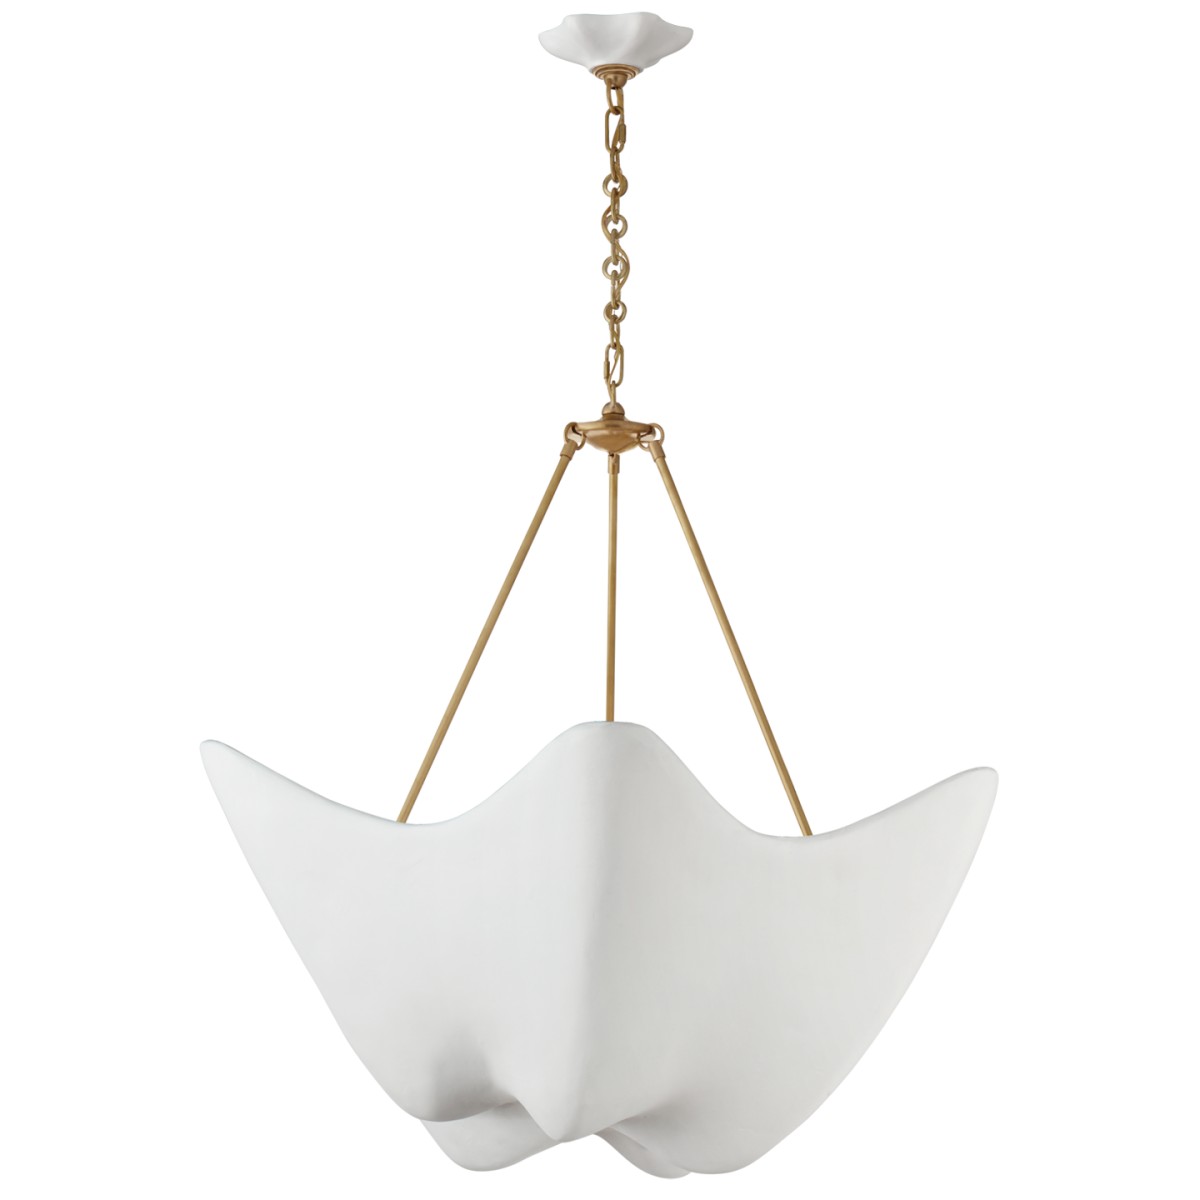 Cosima Large Chandelier with Plaster White Shade